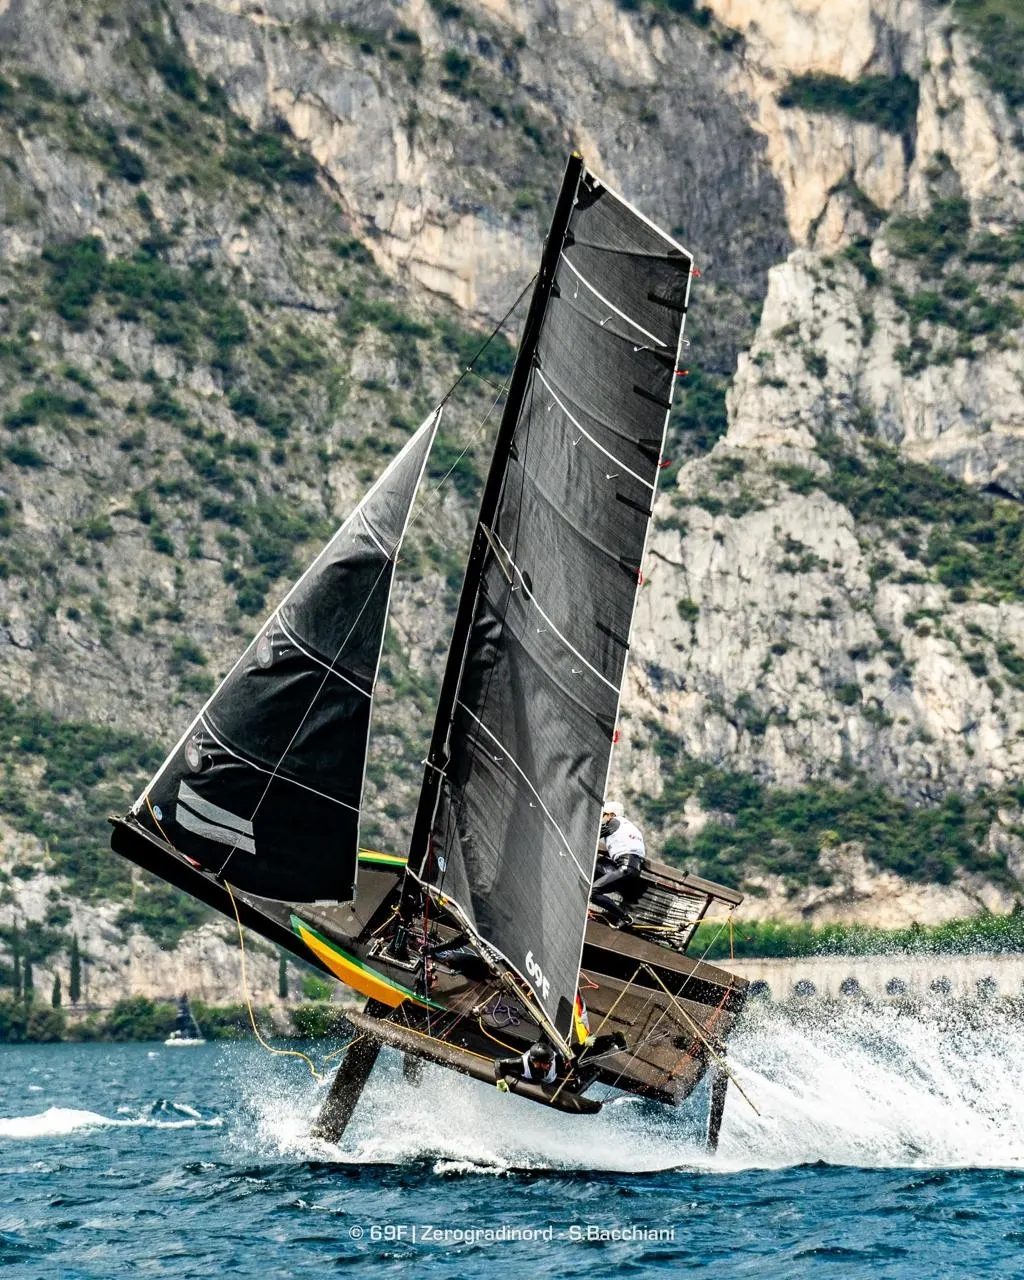  Persico 69F - Youth Gold Cup - Torbole ITA - Day 3